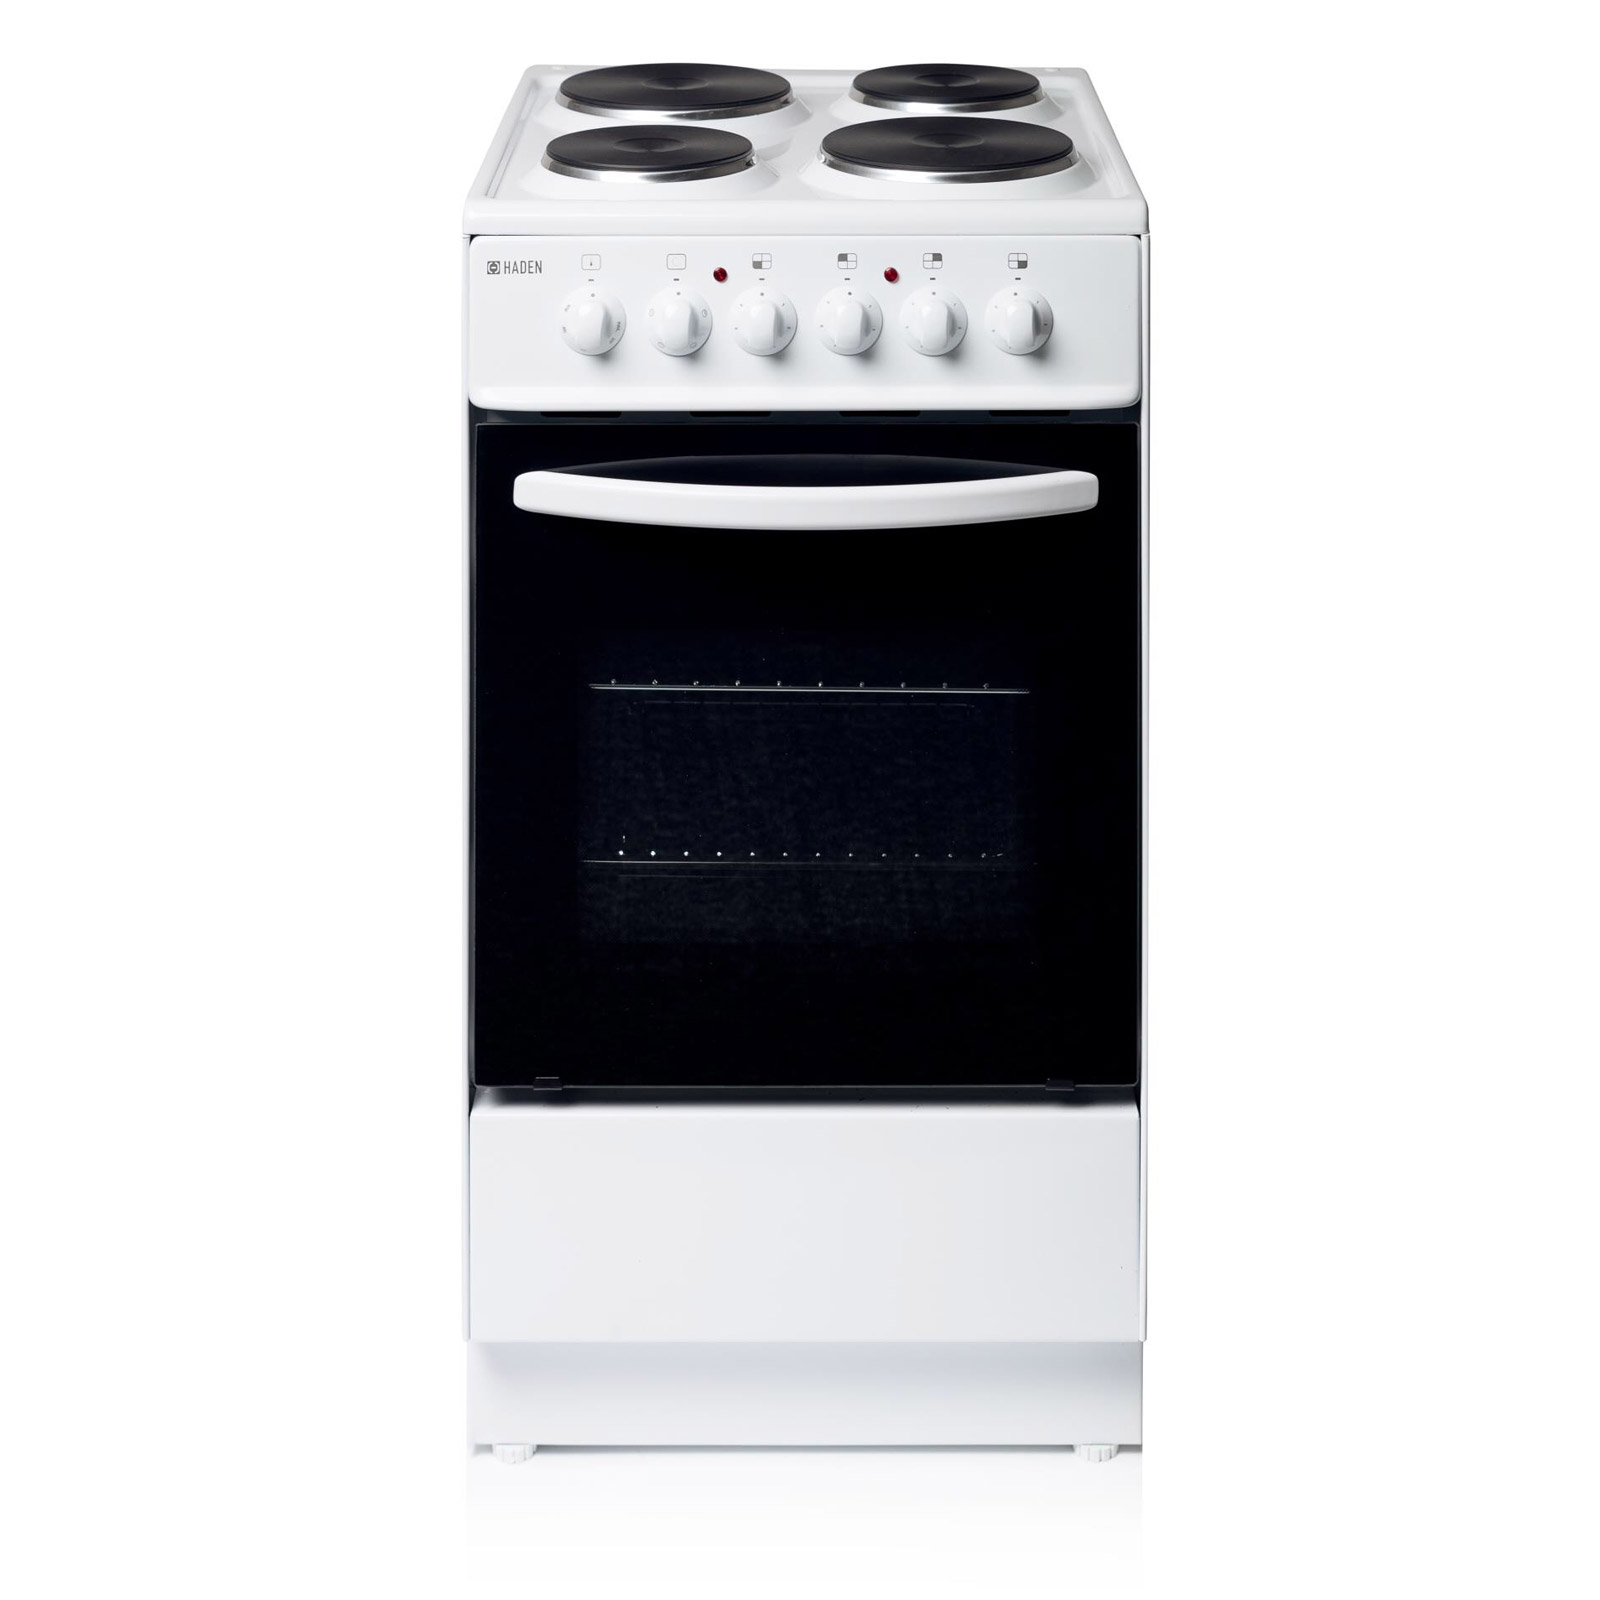 Image of Haden HES50W 50cm Single Oven Electric Cooker in White Solid Plate